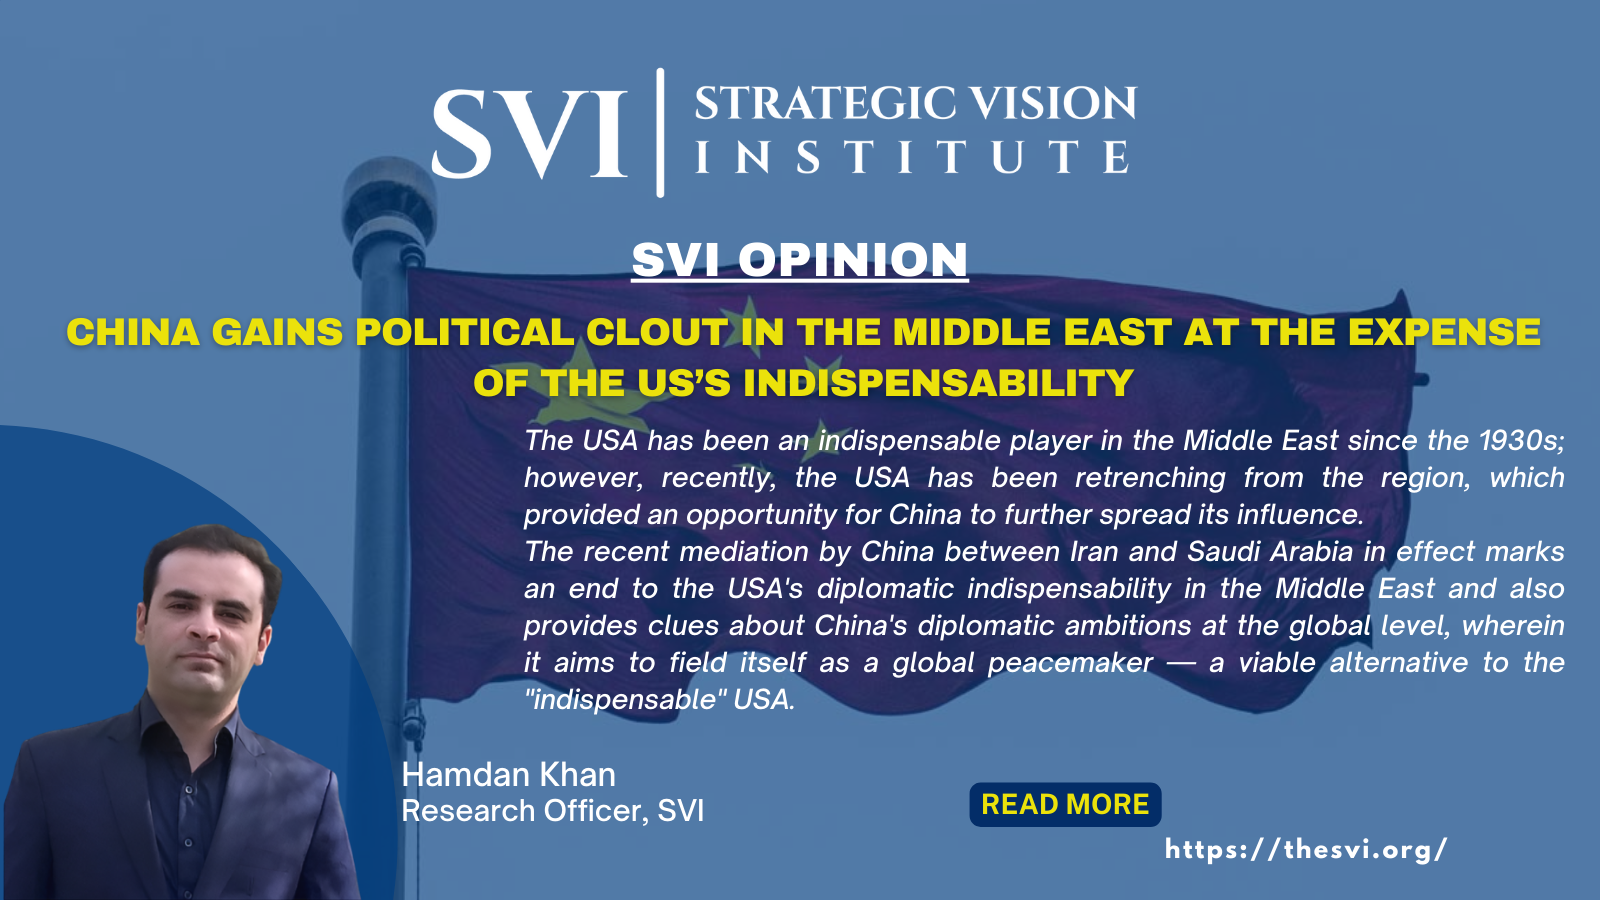 China Gains Political Clout in the Middle East at the expense of the US’s Indispensability